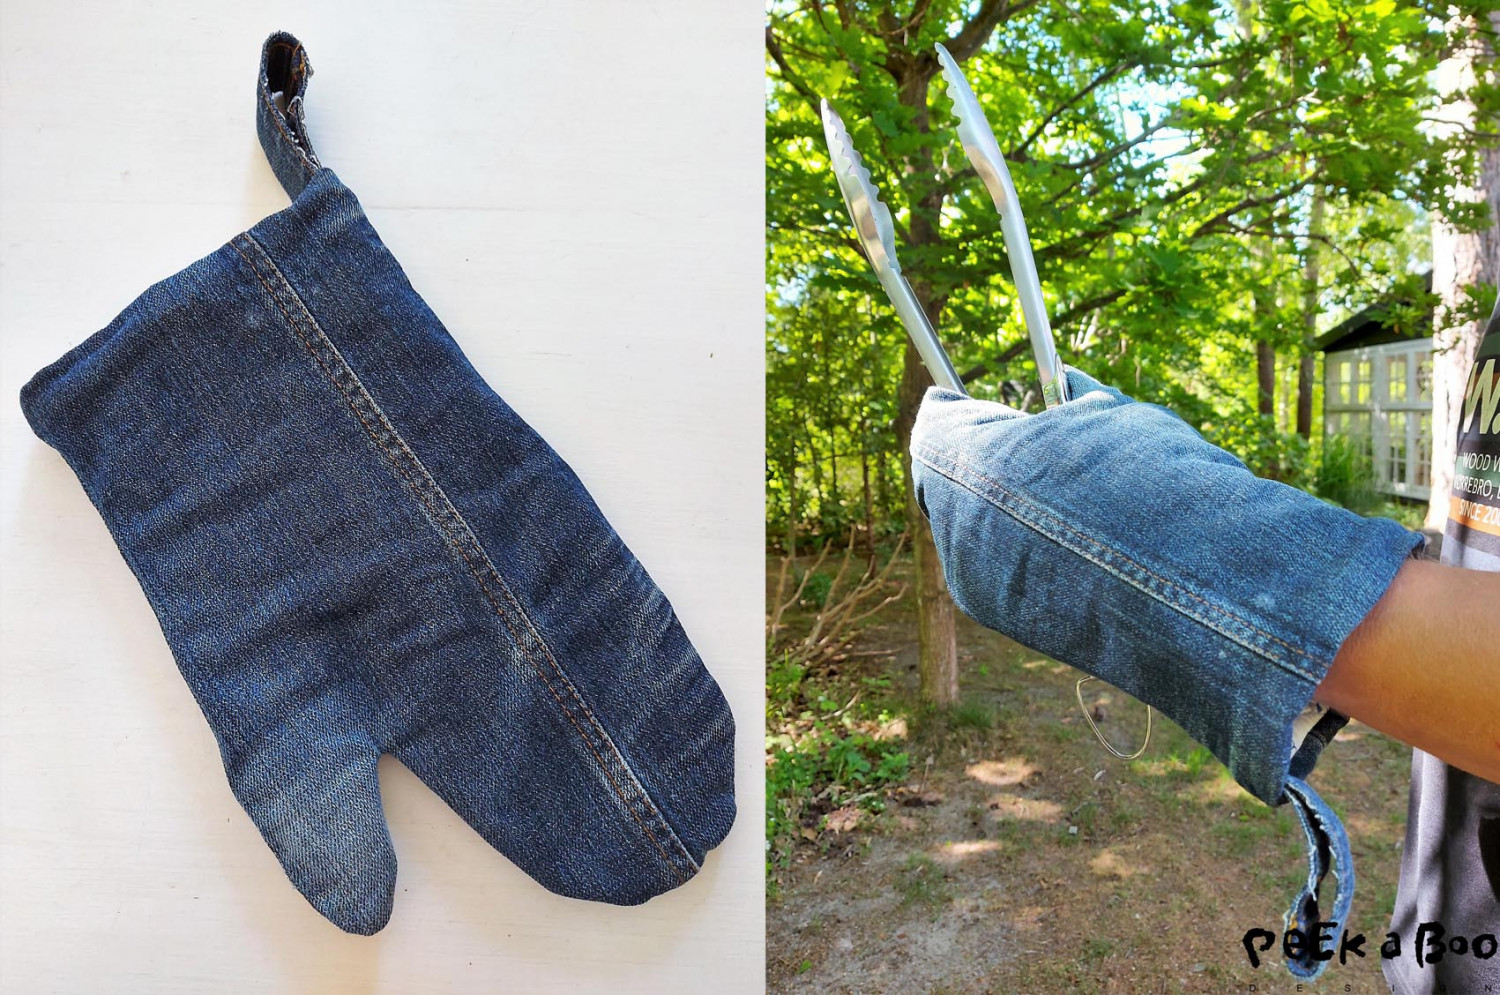 The finished griill glove made entirely of upcycled materials. an easy DIY project for you and the kids.